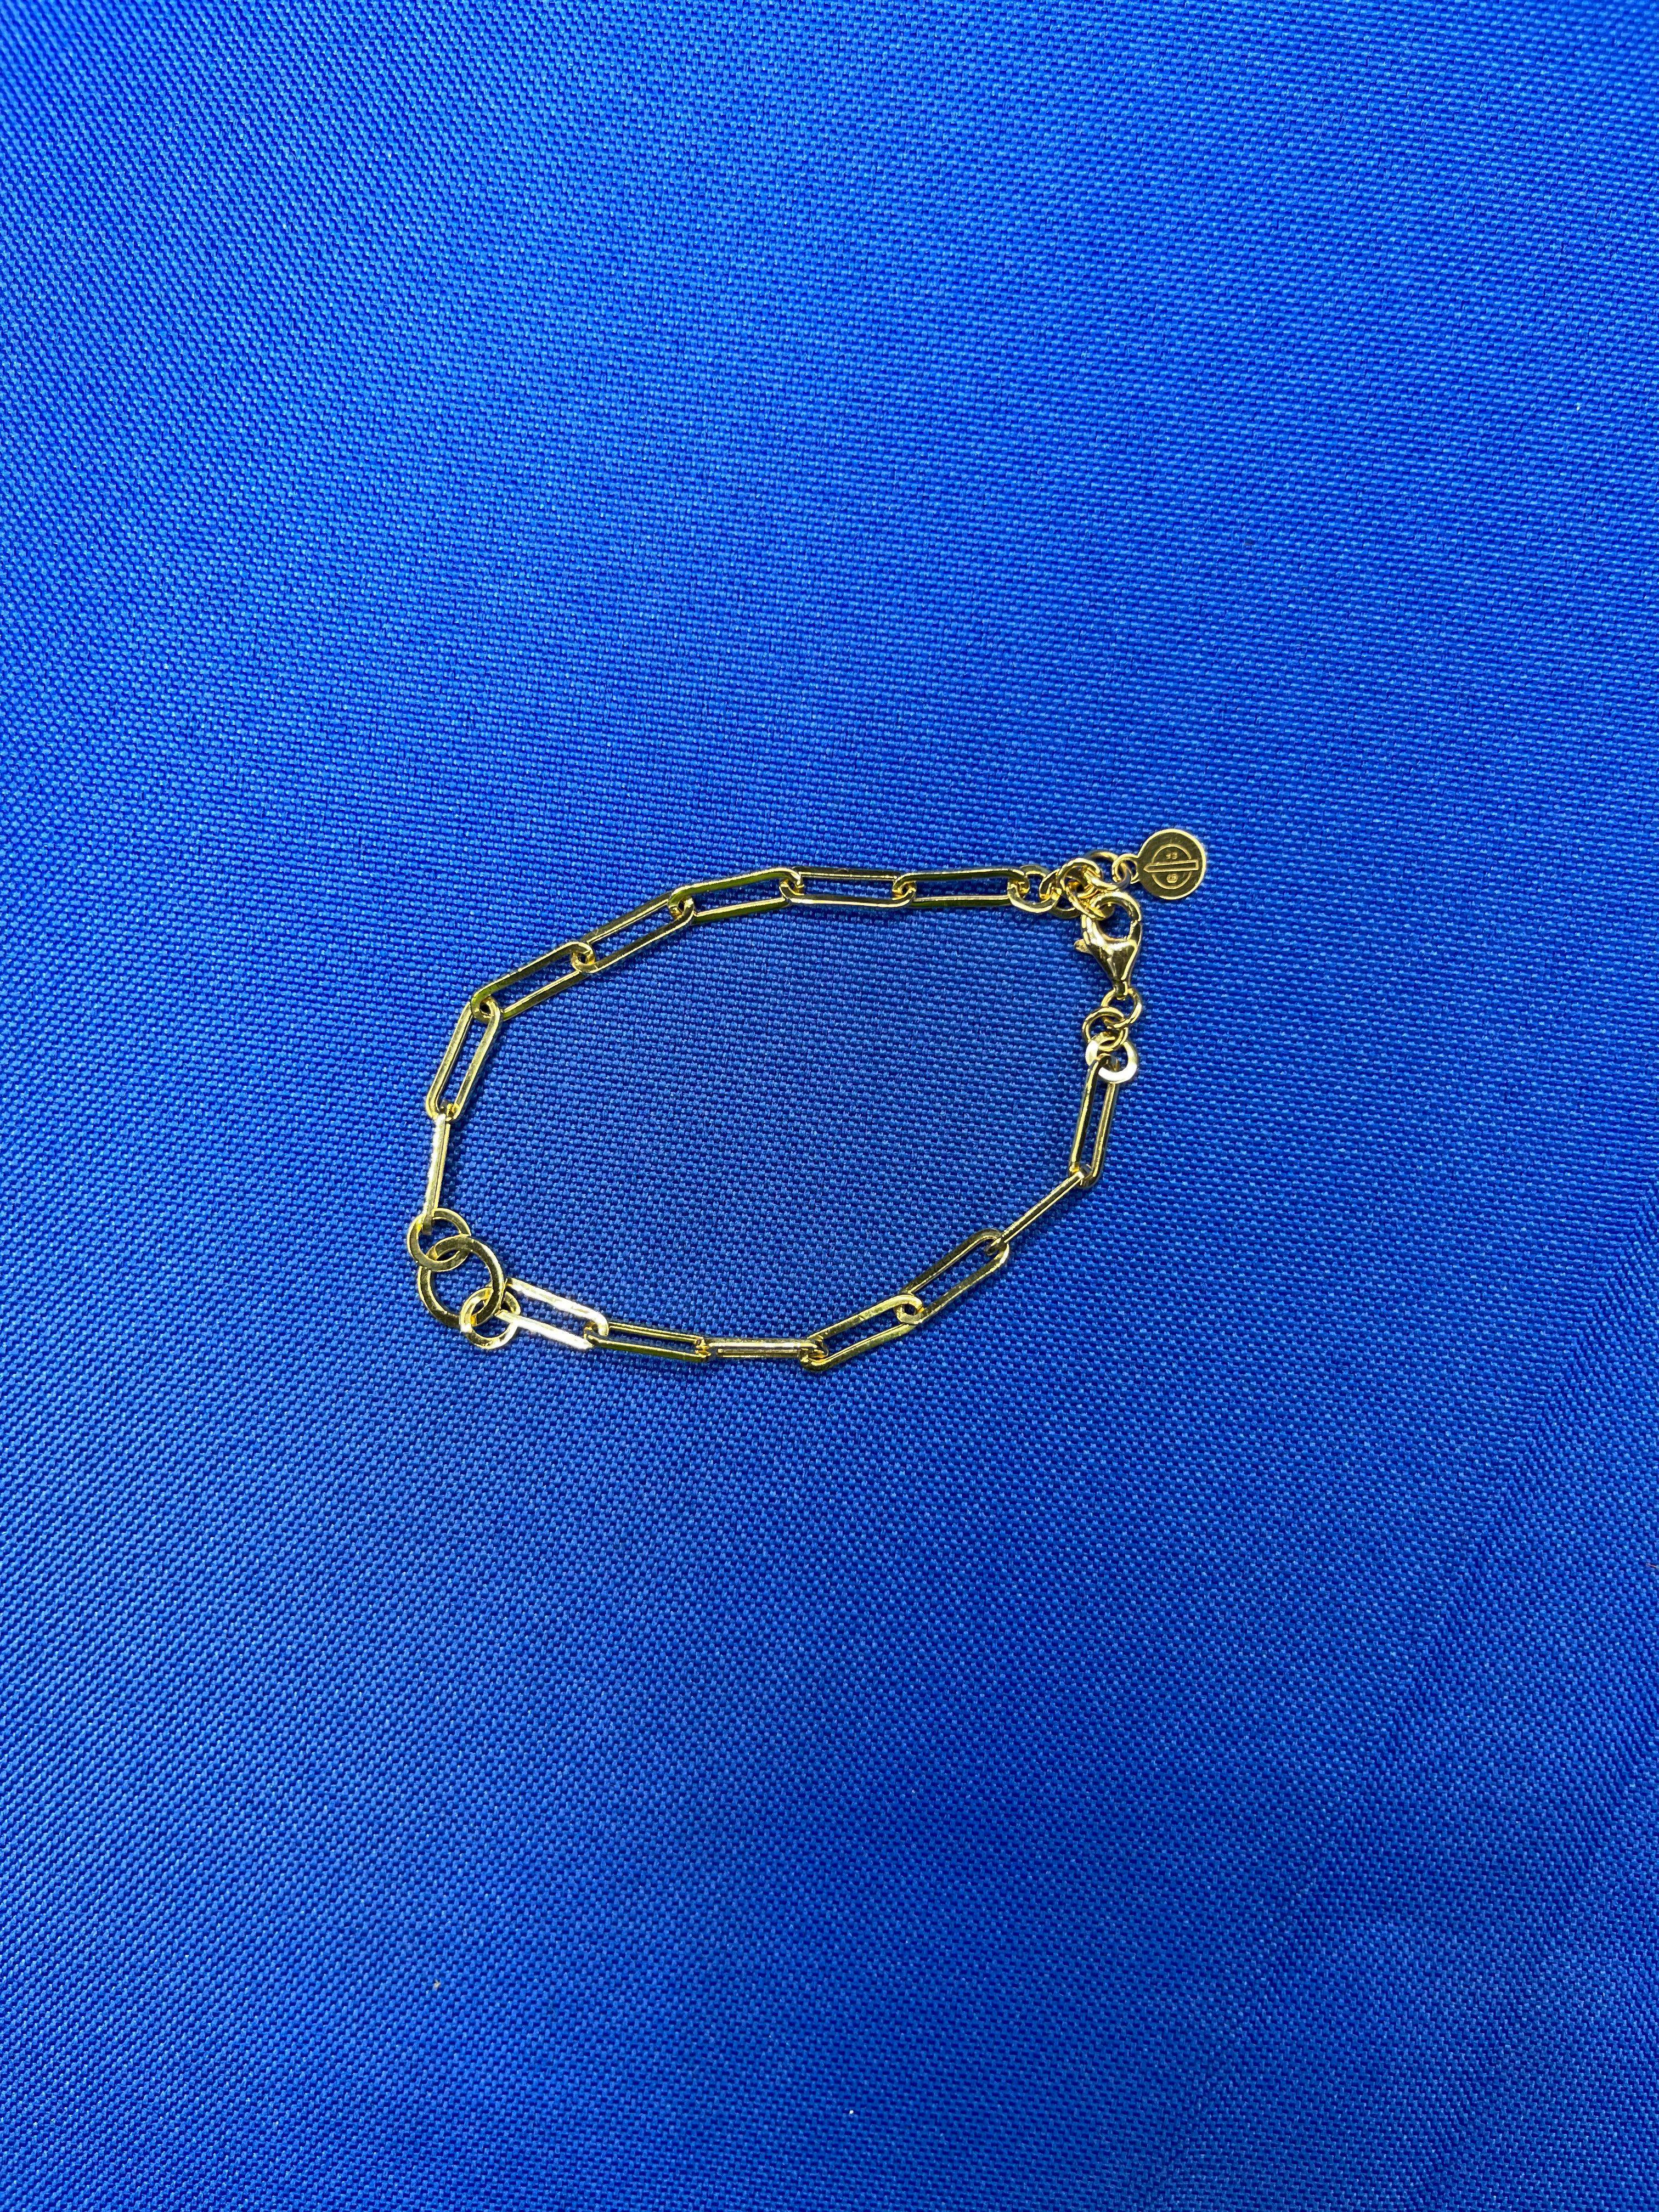 Paper Elongated Clip Link Charms Fashion 18 Karat Yellow Solid Gold Bracelet In New Condition For Sale In Oakton, VA